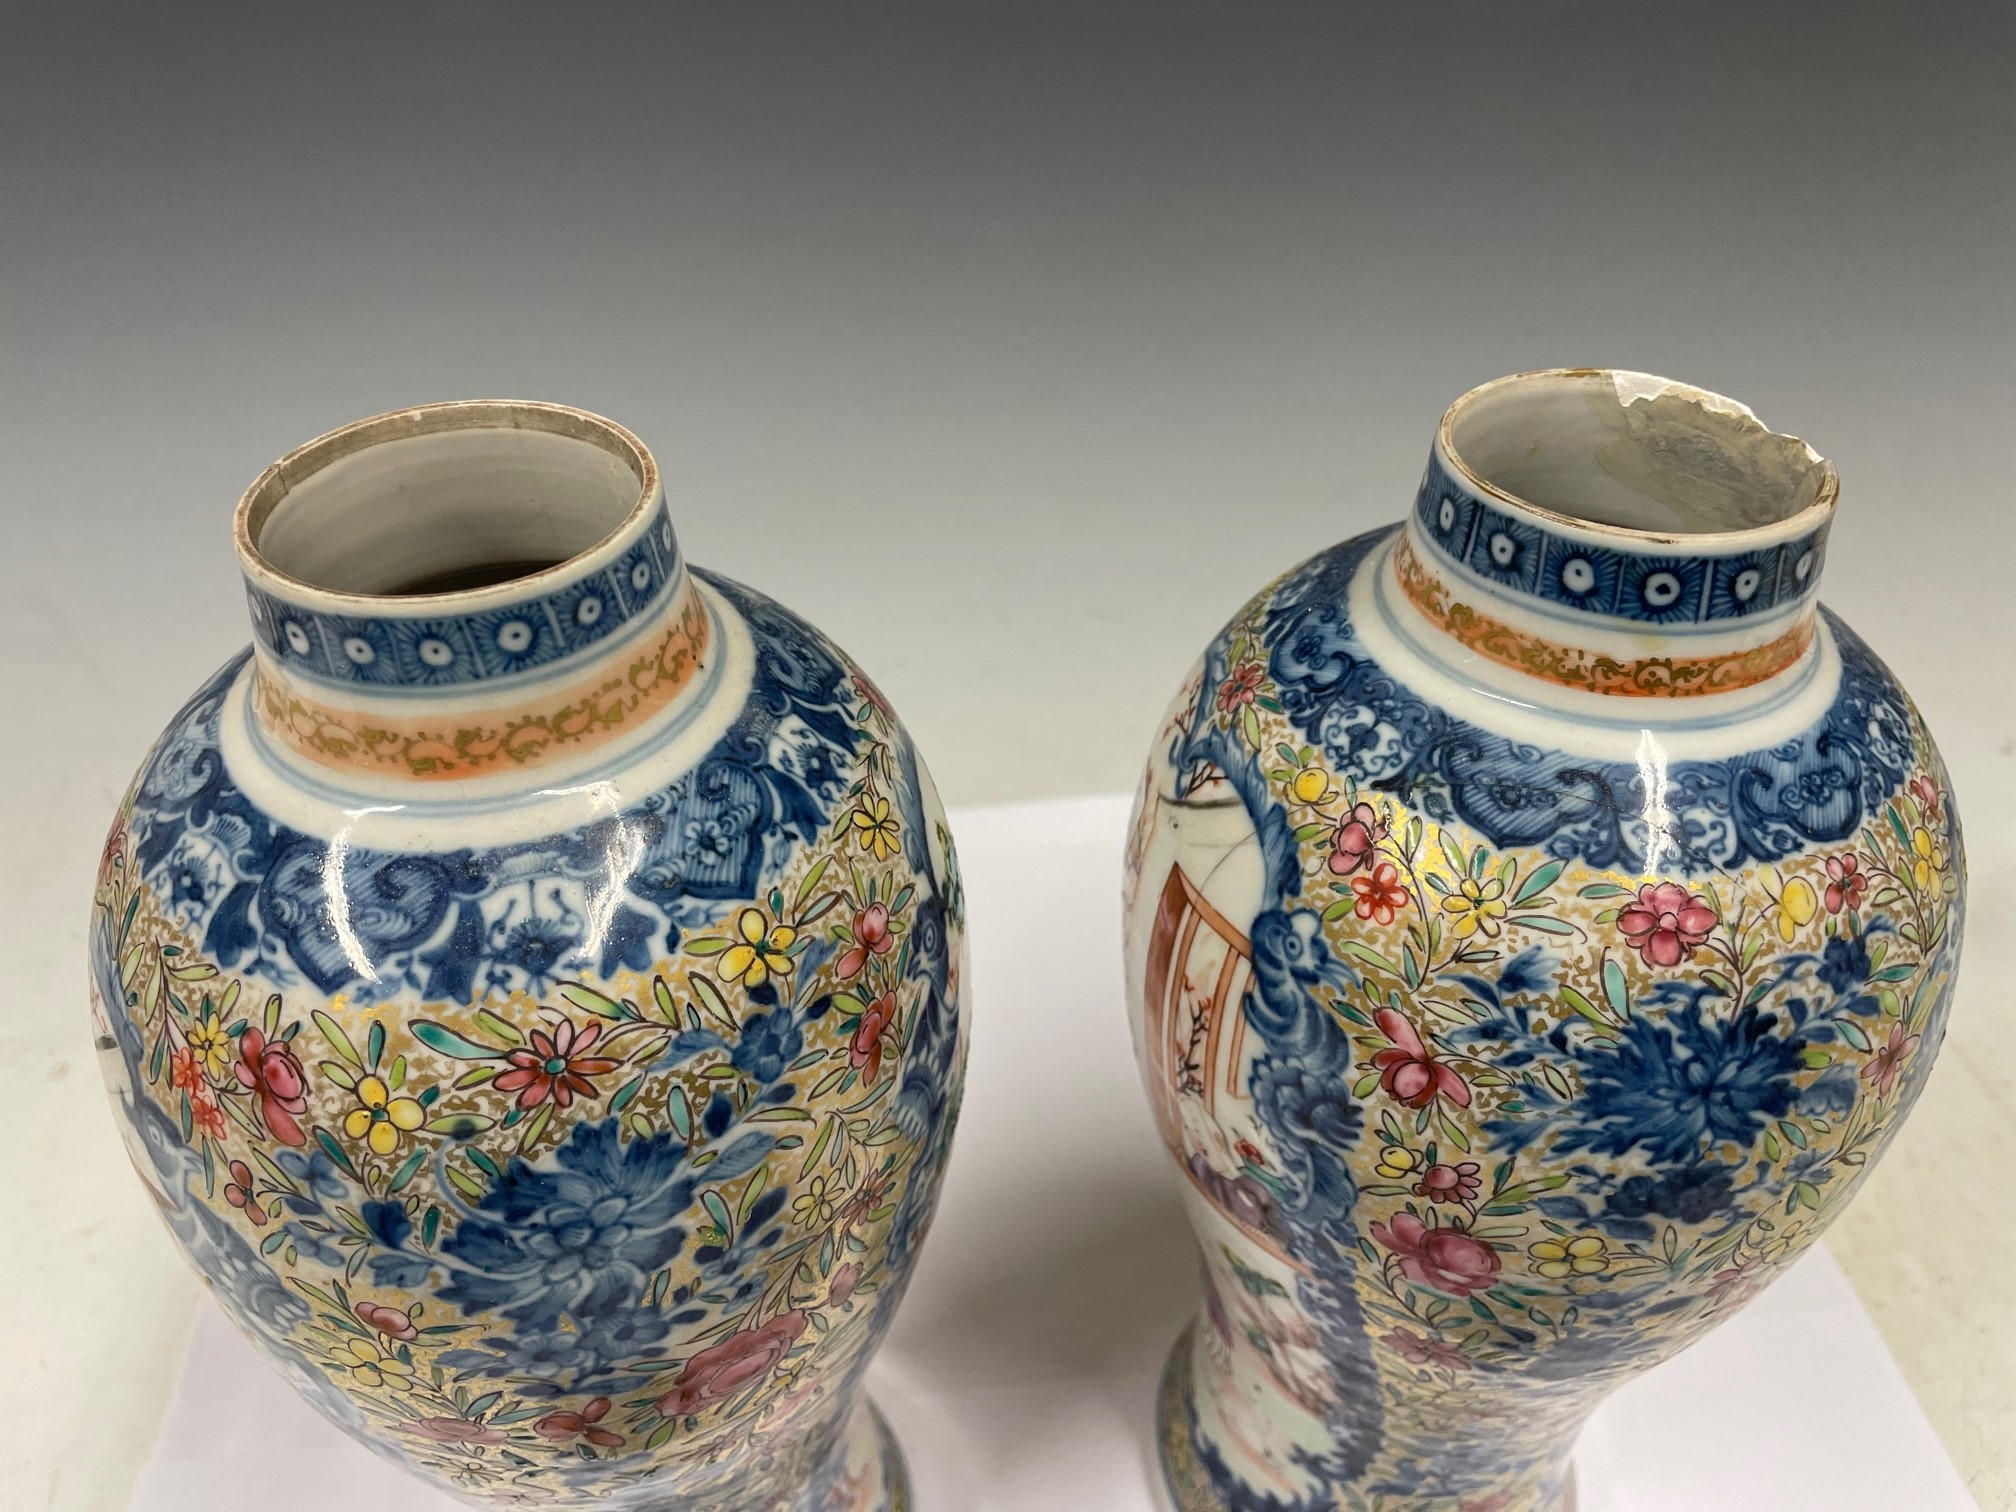 A PAIR OF CHINESE PORCELAIN BLUE AND WHITE JARS AND COVERS, QING DYNASTY, WITH FAMILLE ROSE ENAMEL - Image 6 of 7